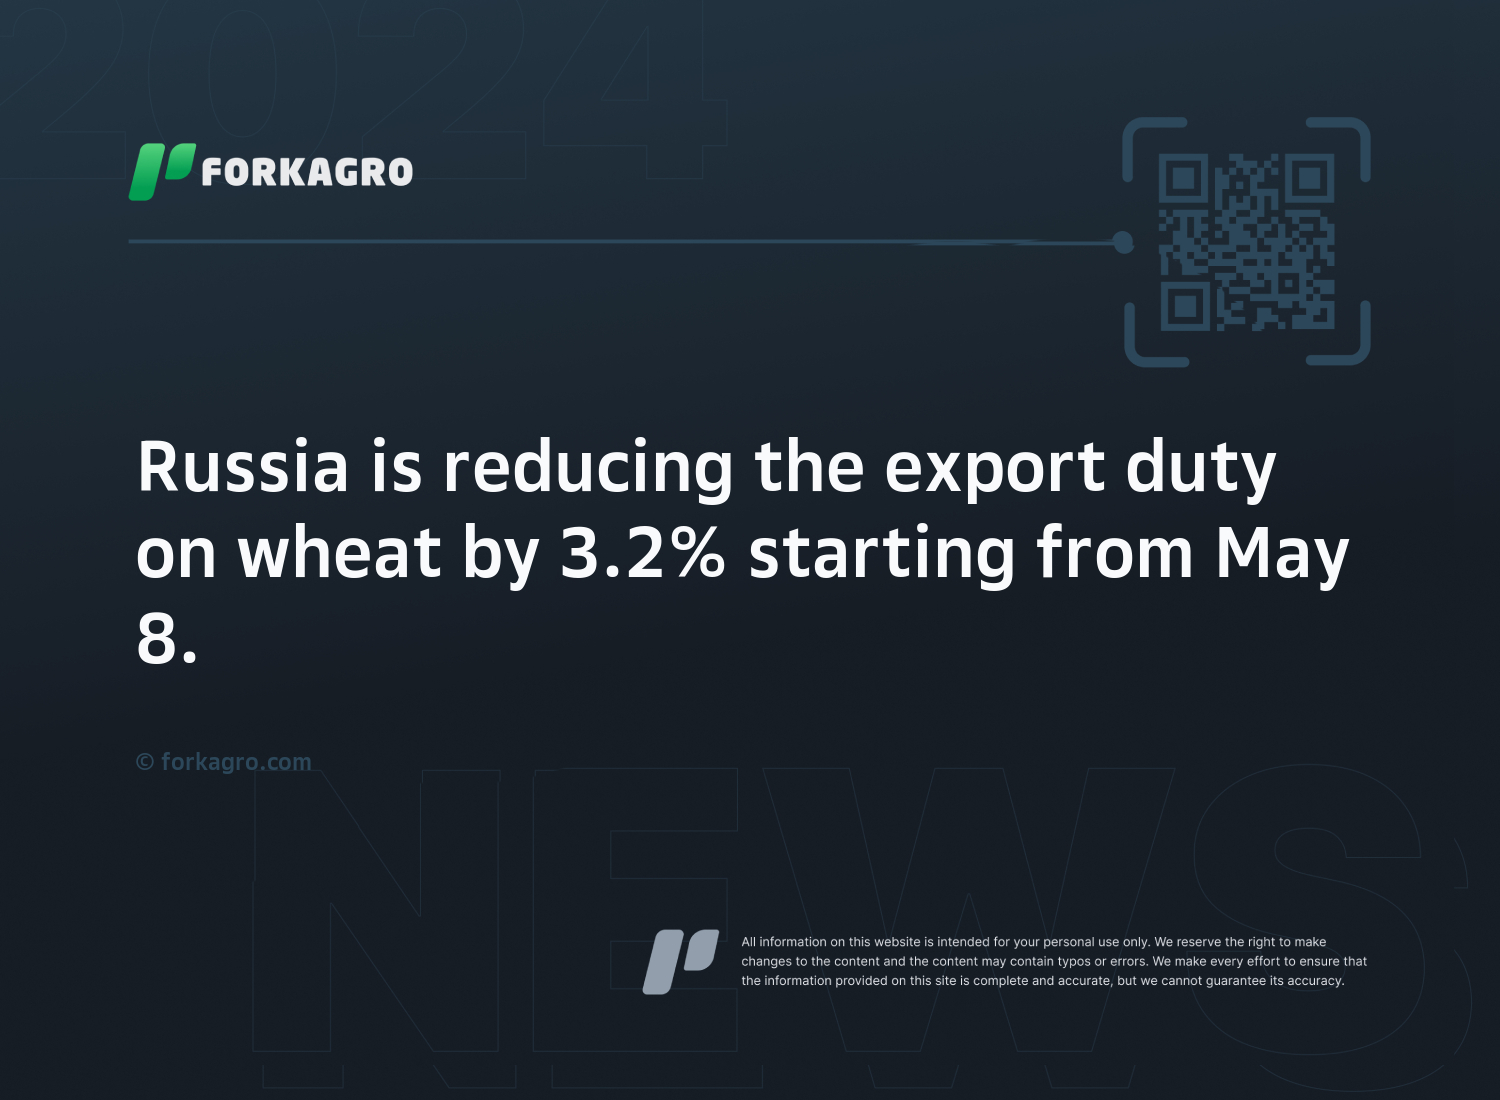 Russia is reducing the export duty on wheat by 3.2% starting from May 8.